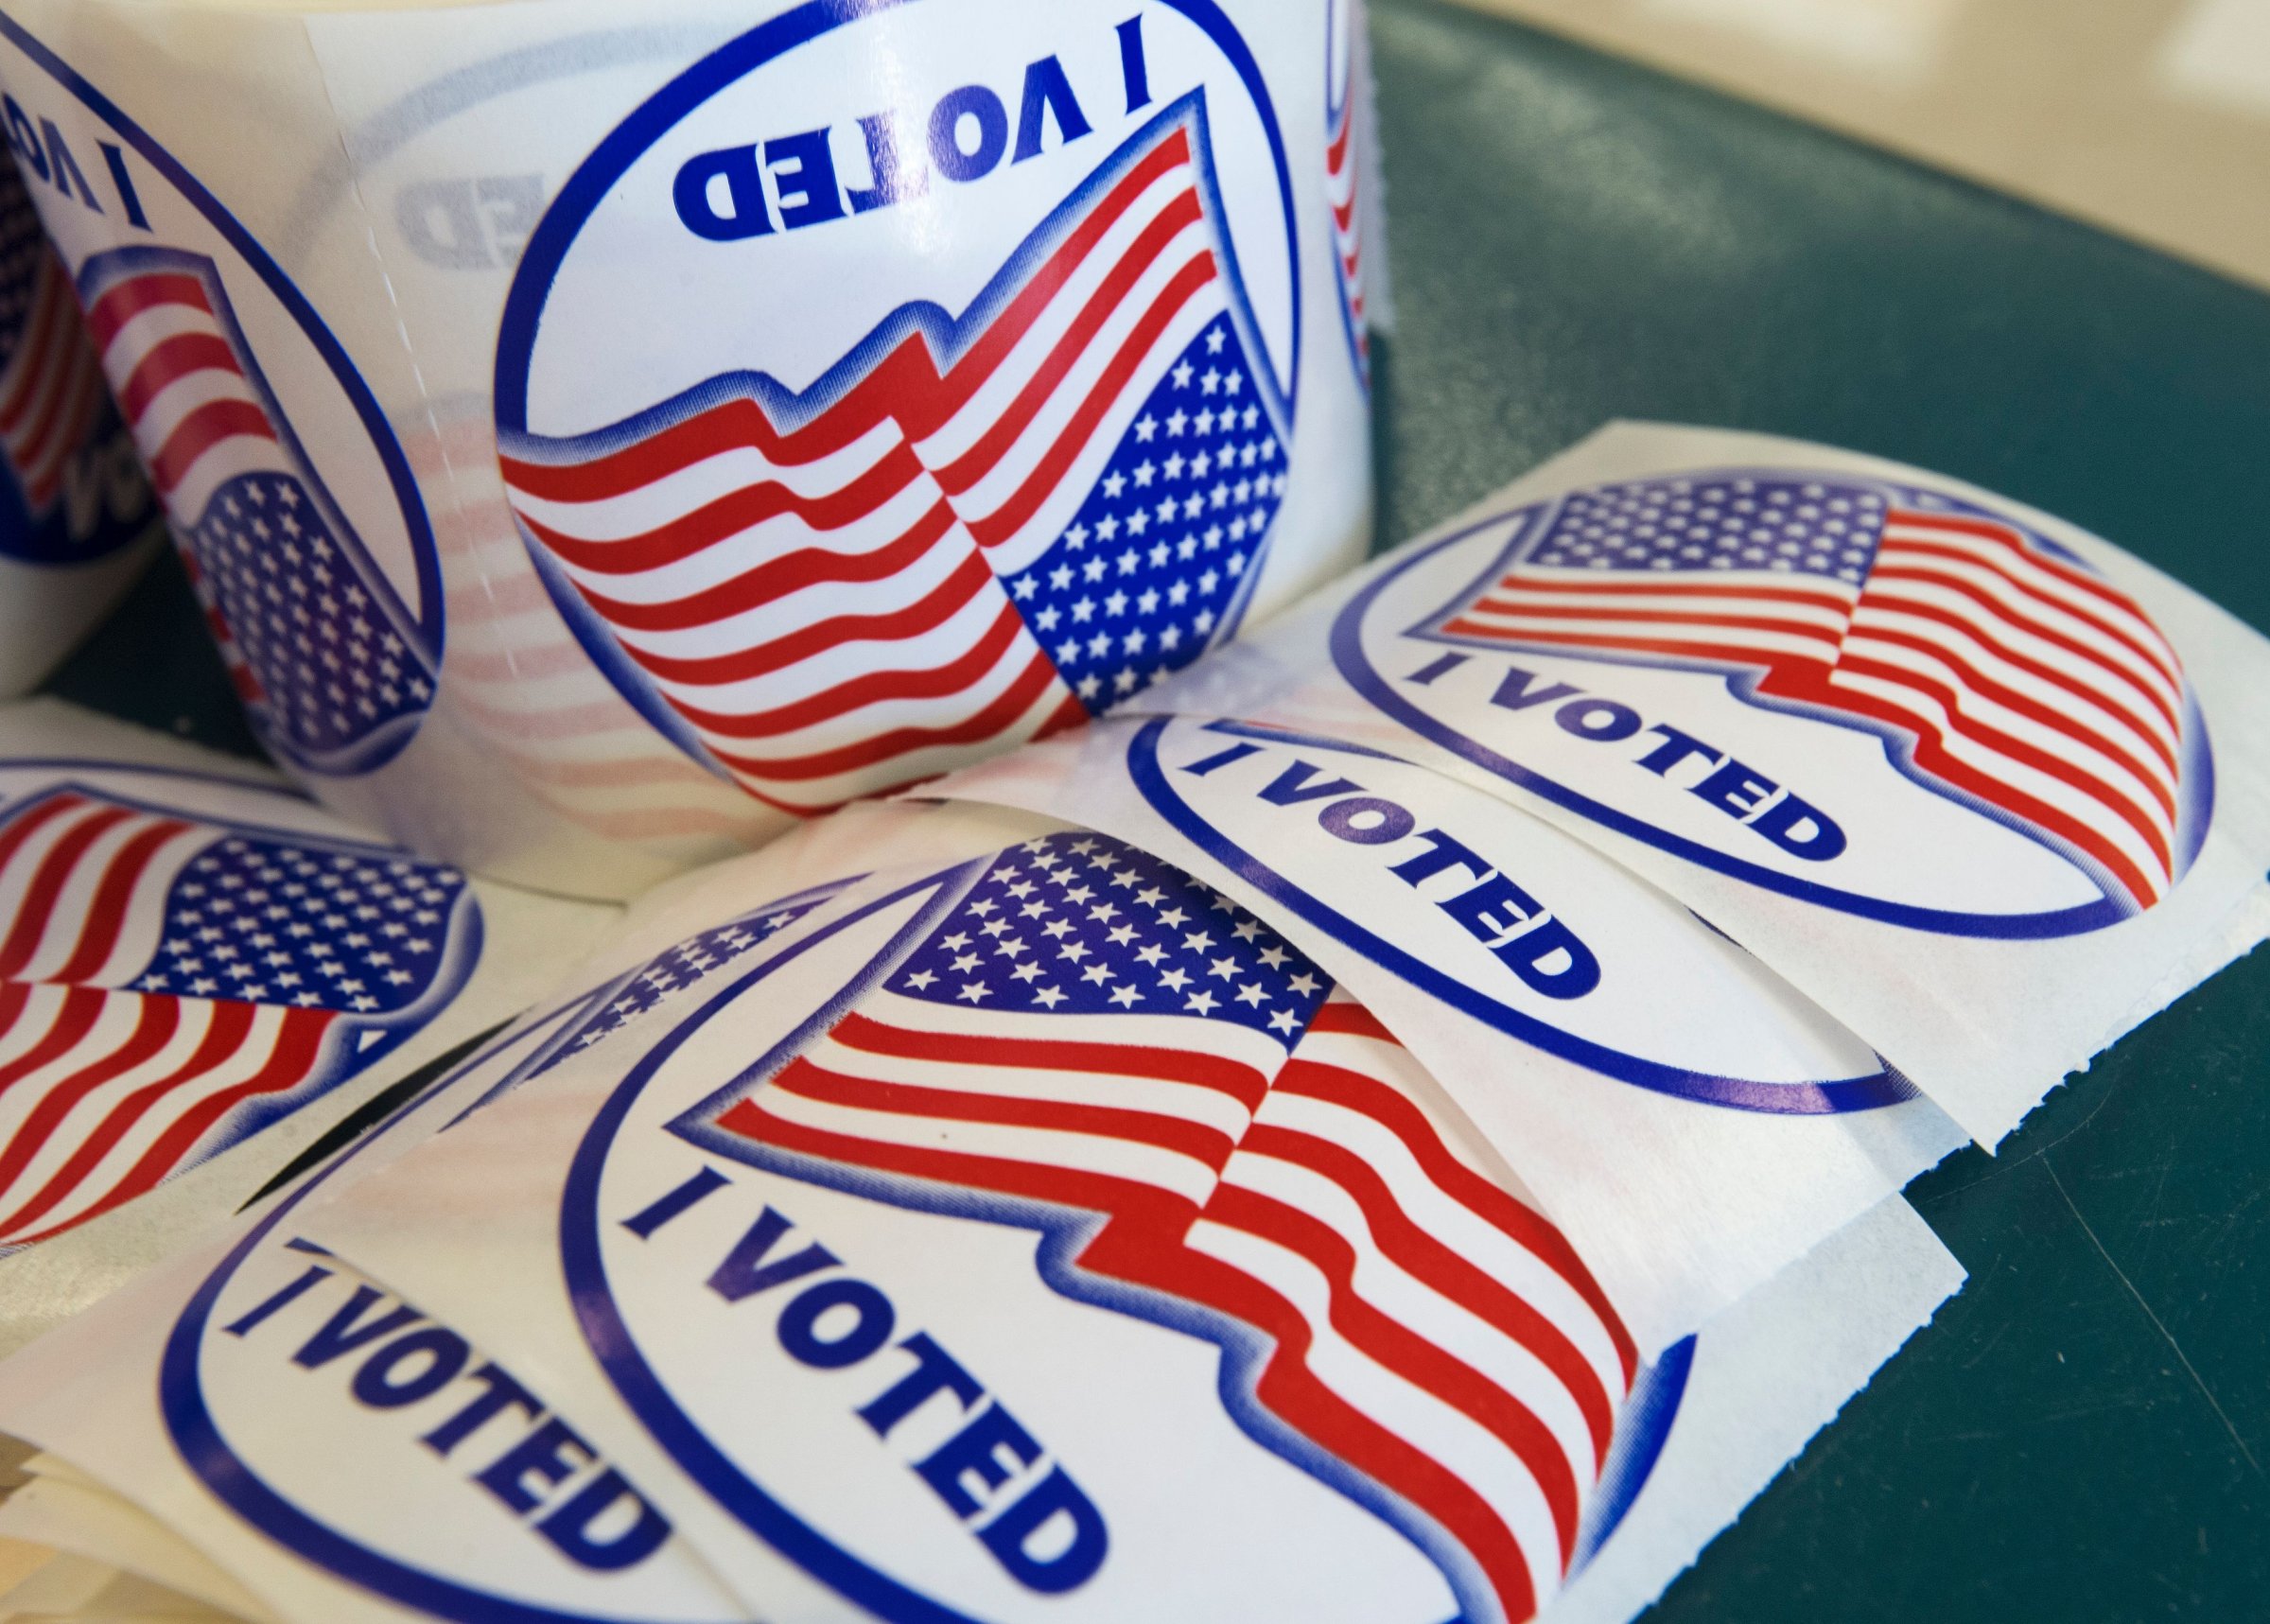 "I voted" stickers, given to those who vote, are seen November 8, 2016, at Colin Powwell Elementary School, in Centreville, Virginia.